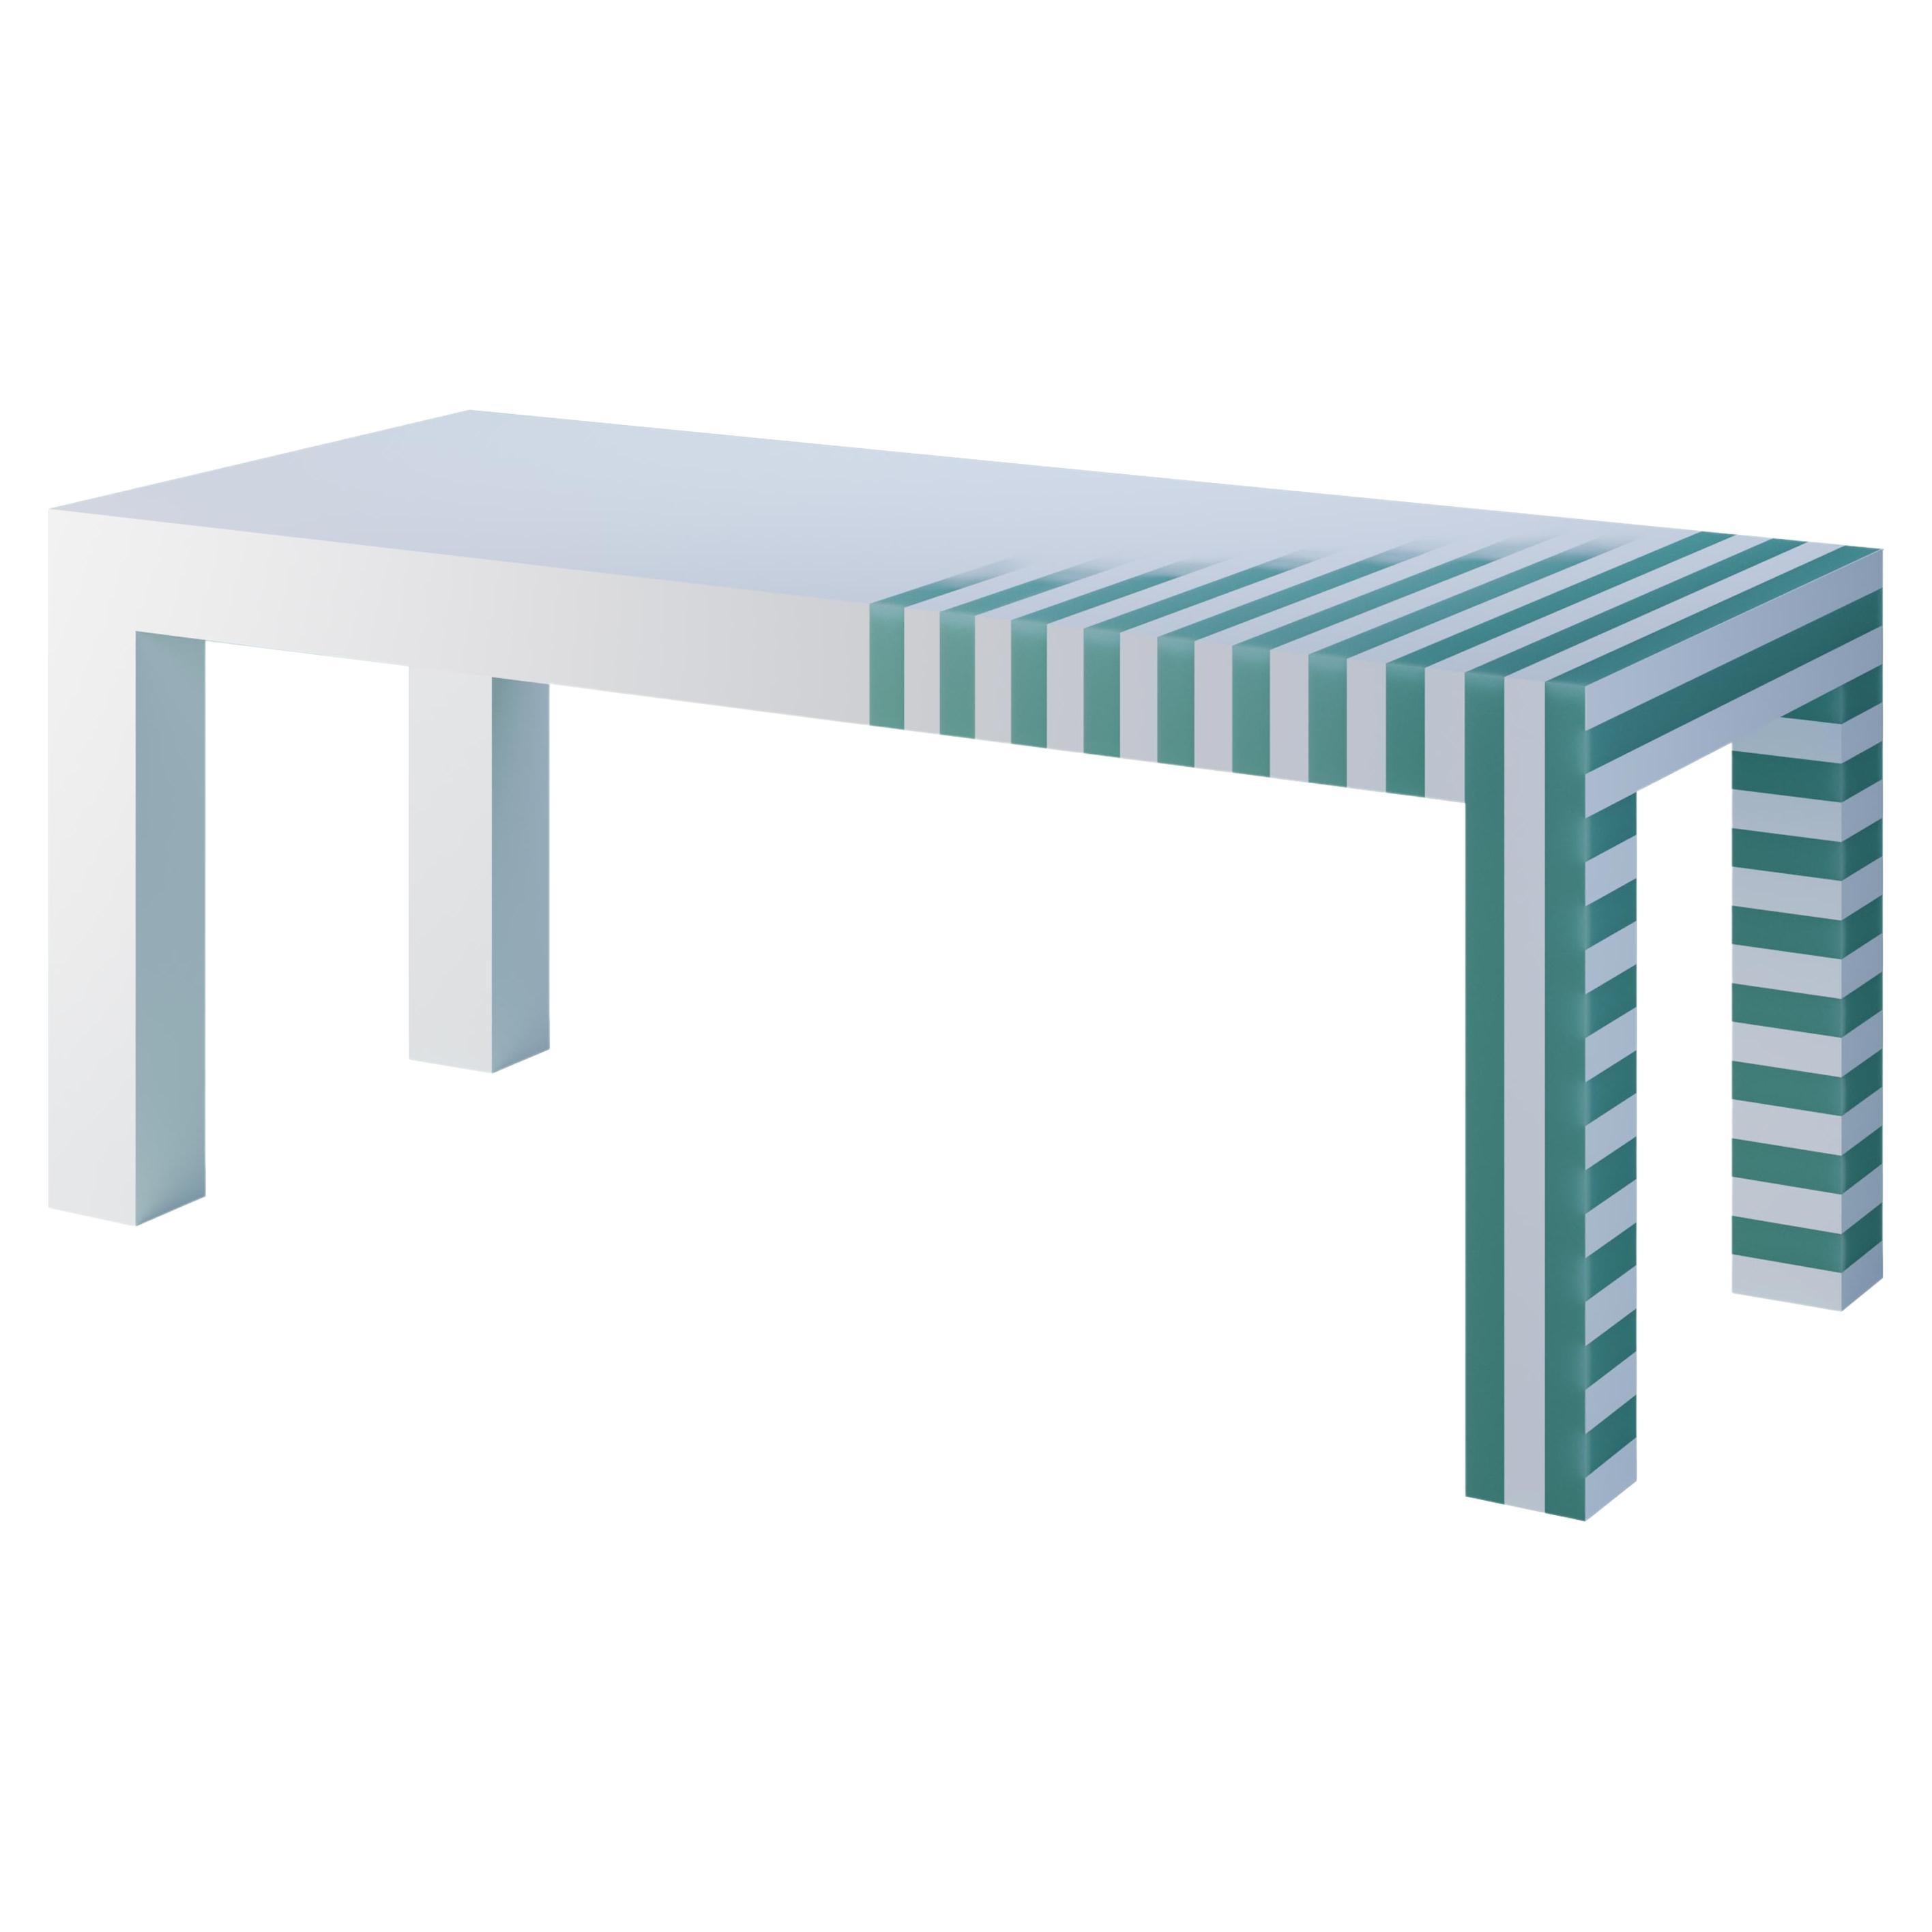 Siena resin table customizable by Sandro Giulianelli & Adrian Cruz made in Italy For Sale